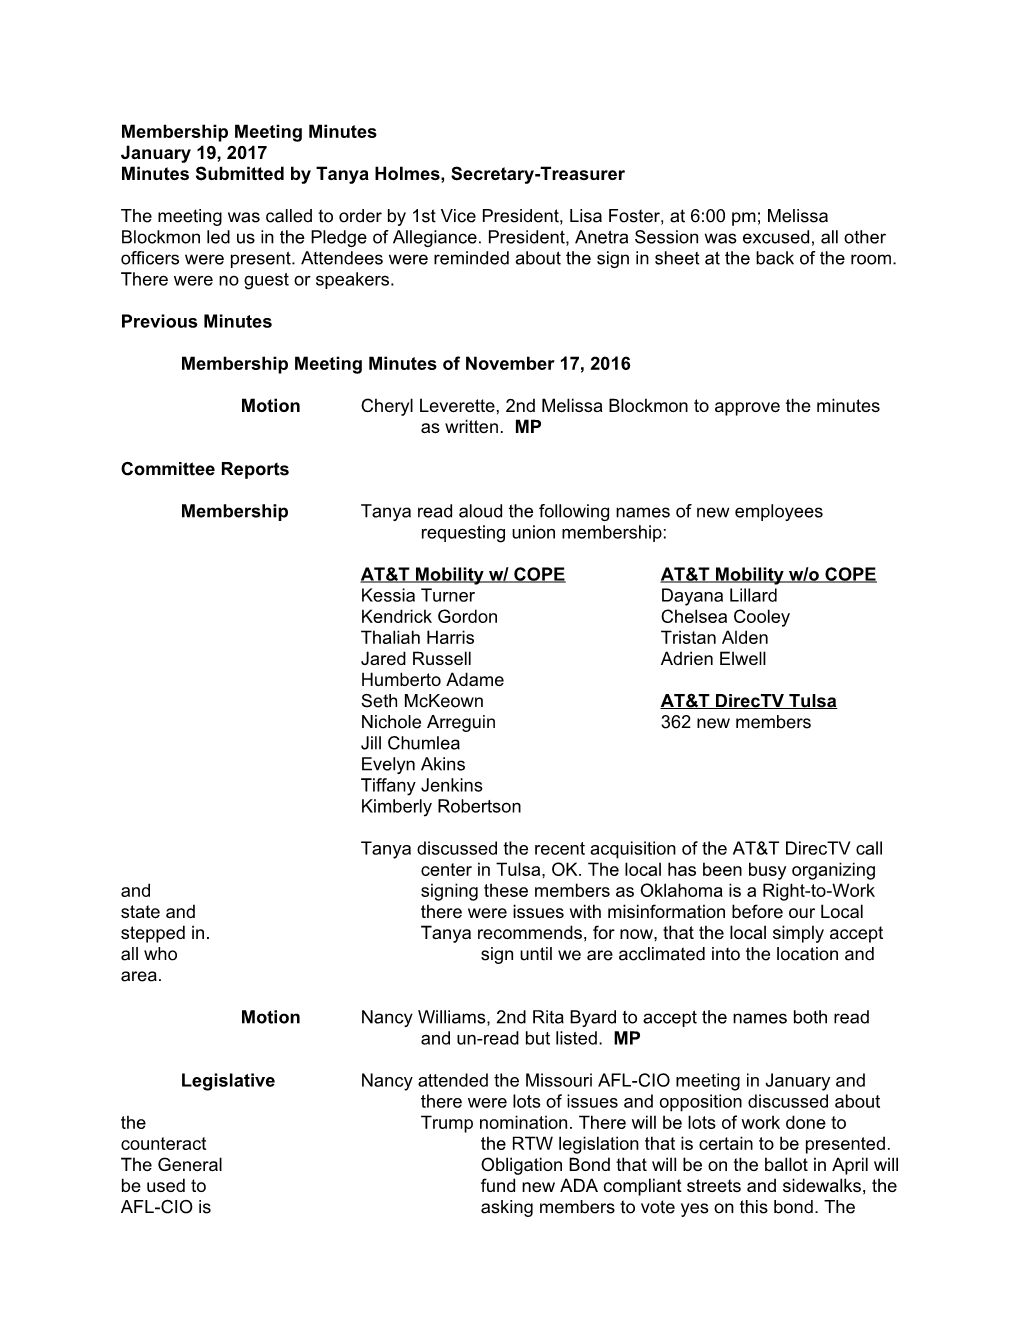 Minutes Submitted by Tanya Holmes, Secretary-Treasurer